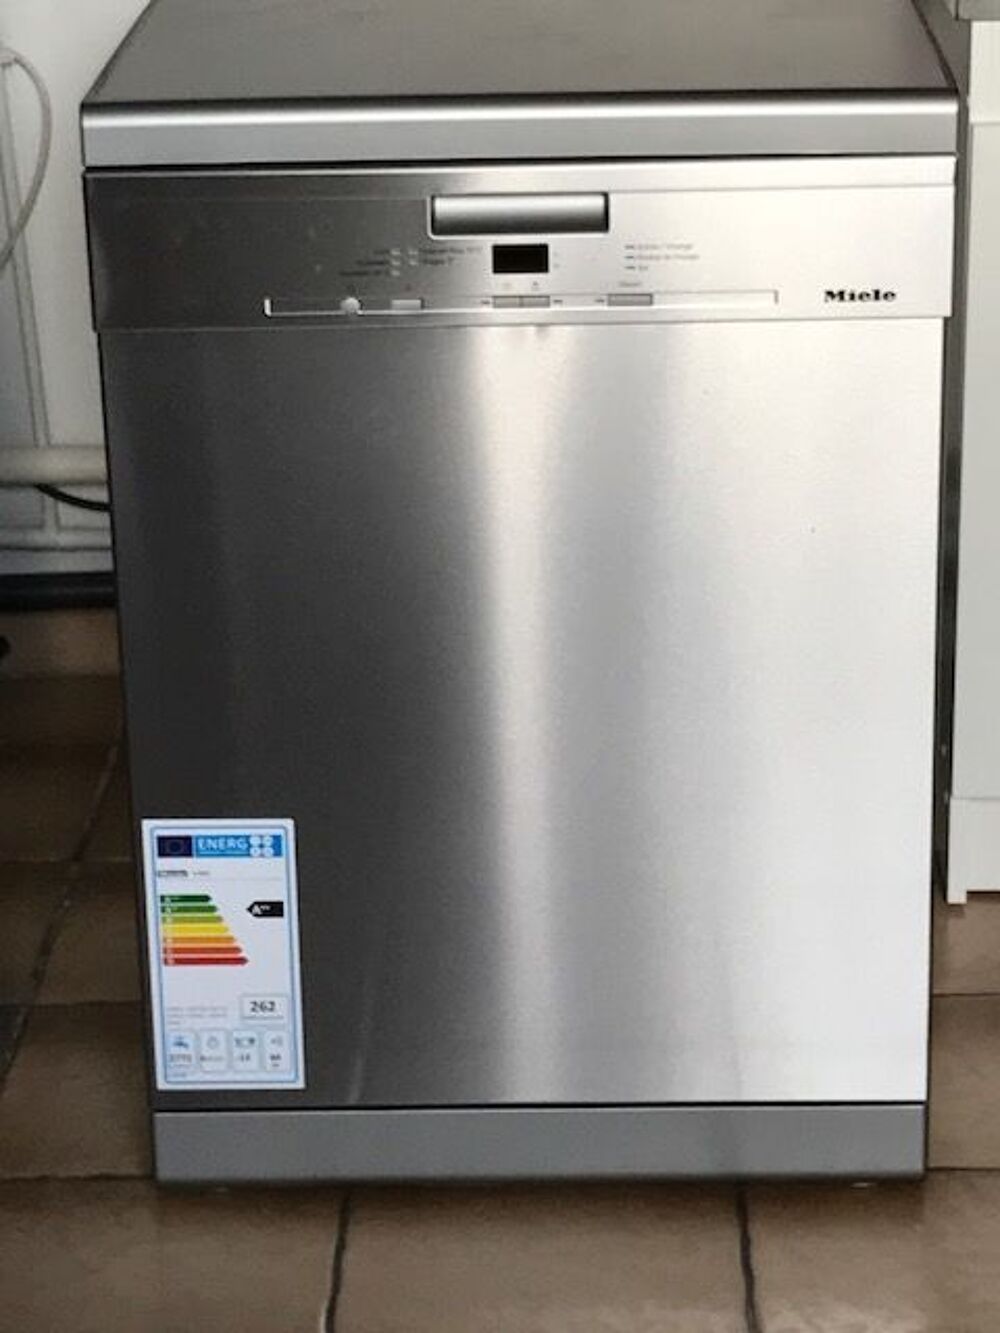 LAVE VAISSELLE MIELE INOX NEUF Electromnager